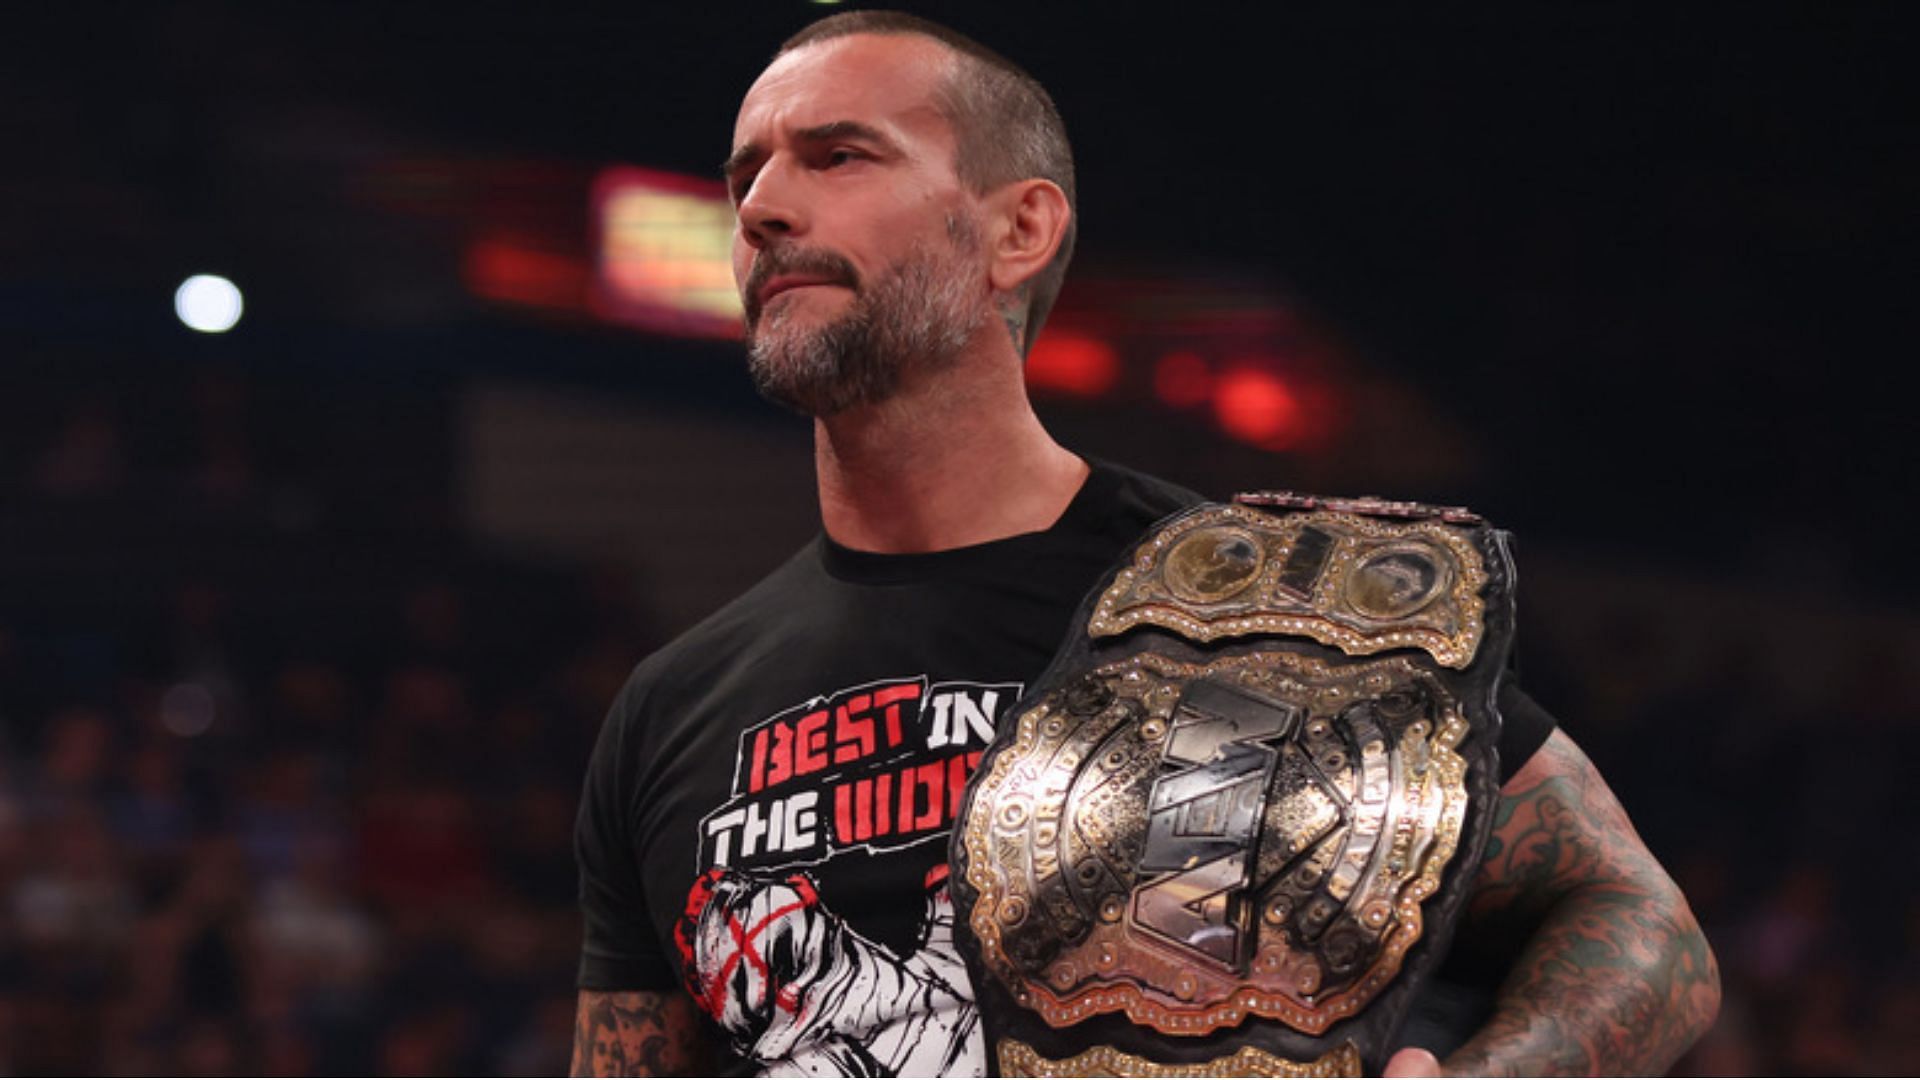 Did CM Punk and this star get into a heated altercation again?